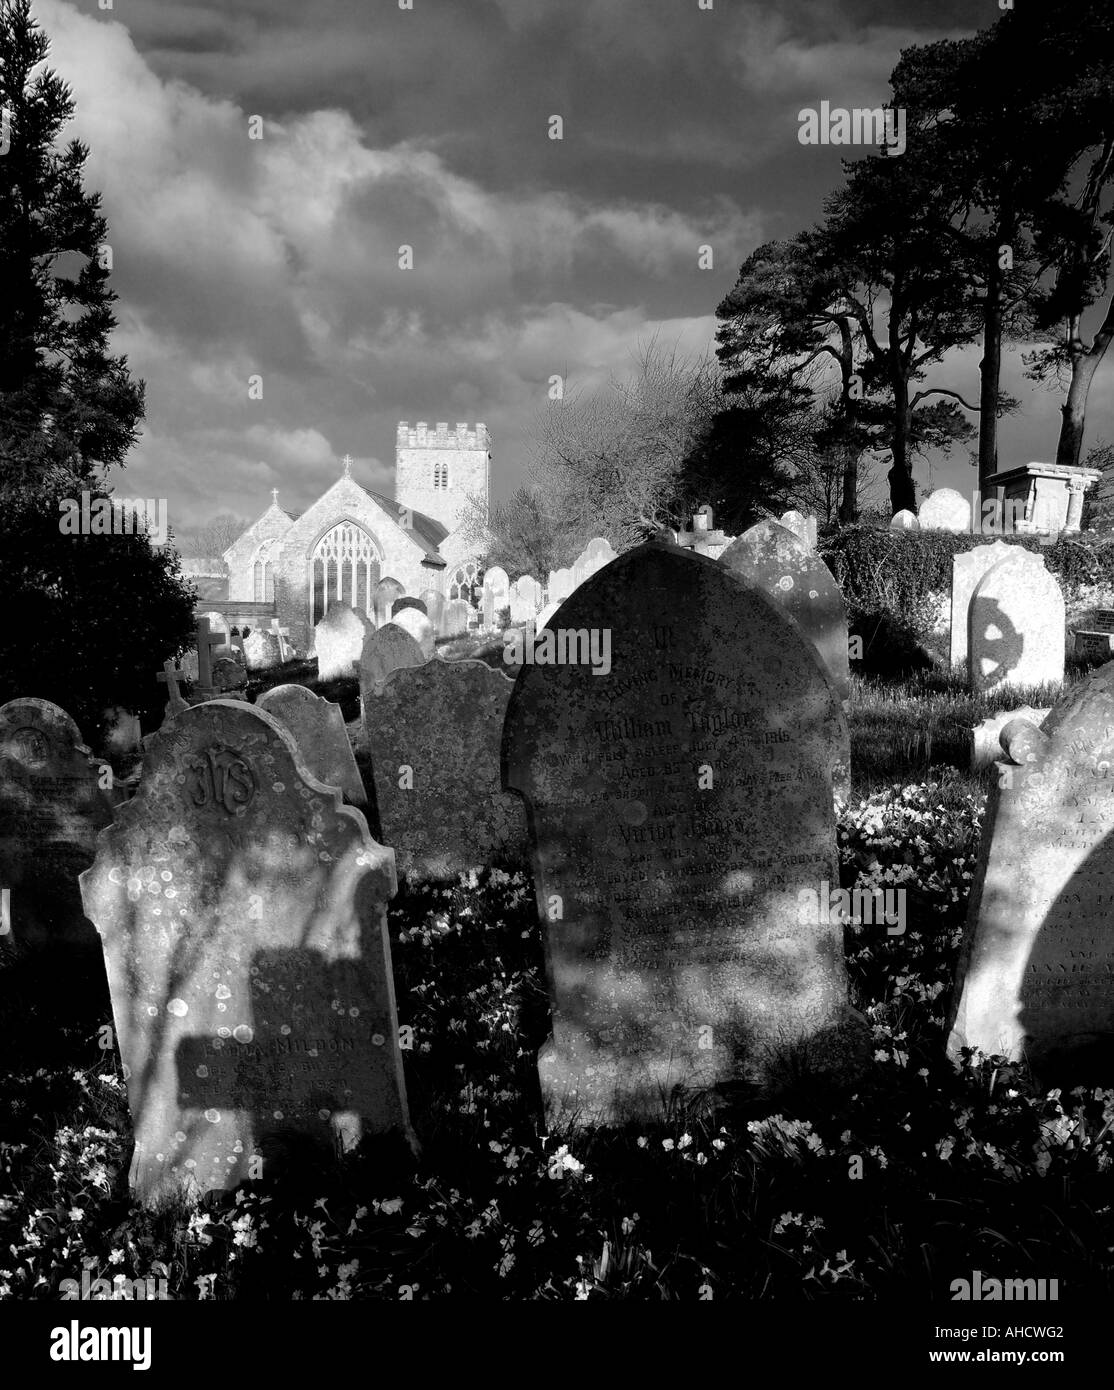 Very atmospheric high contrast mono image of churchyard with early morning sunlight illuiminating the church as if glowing Stock Photo